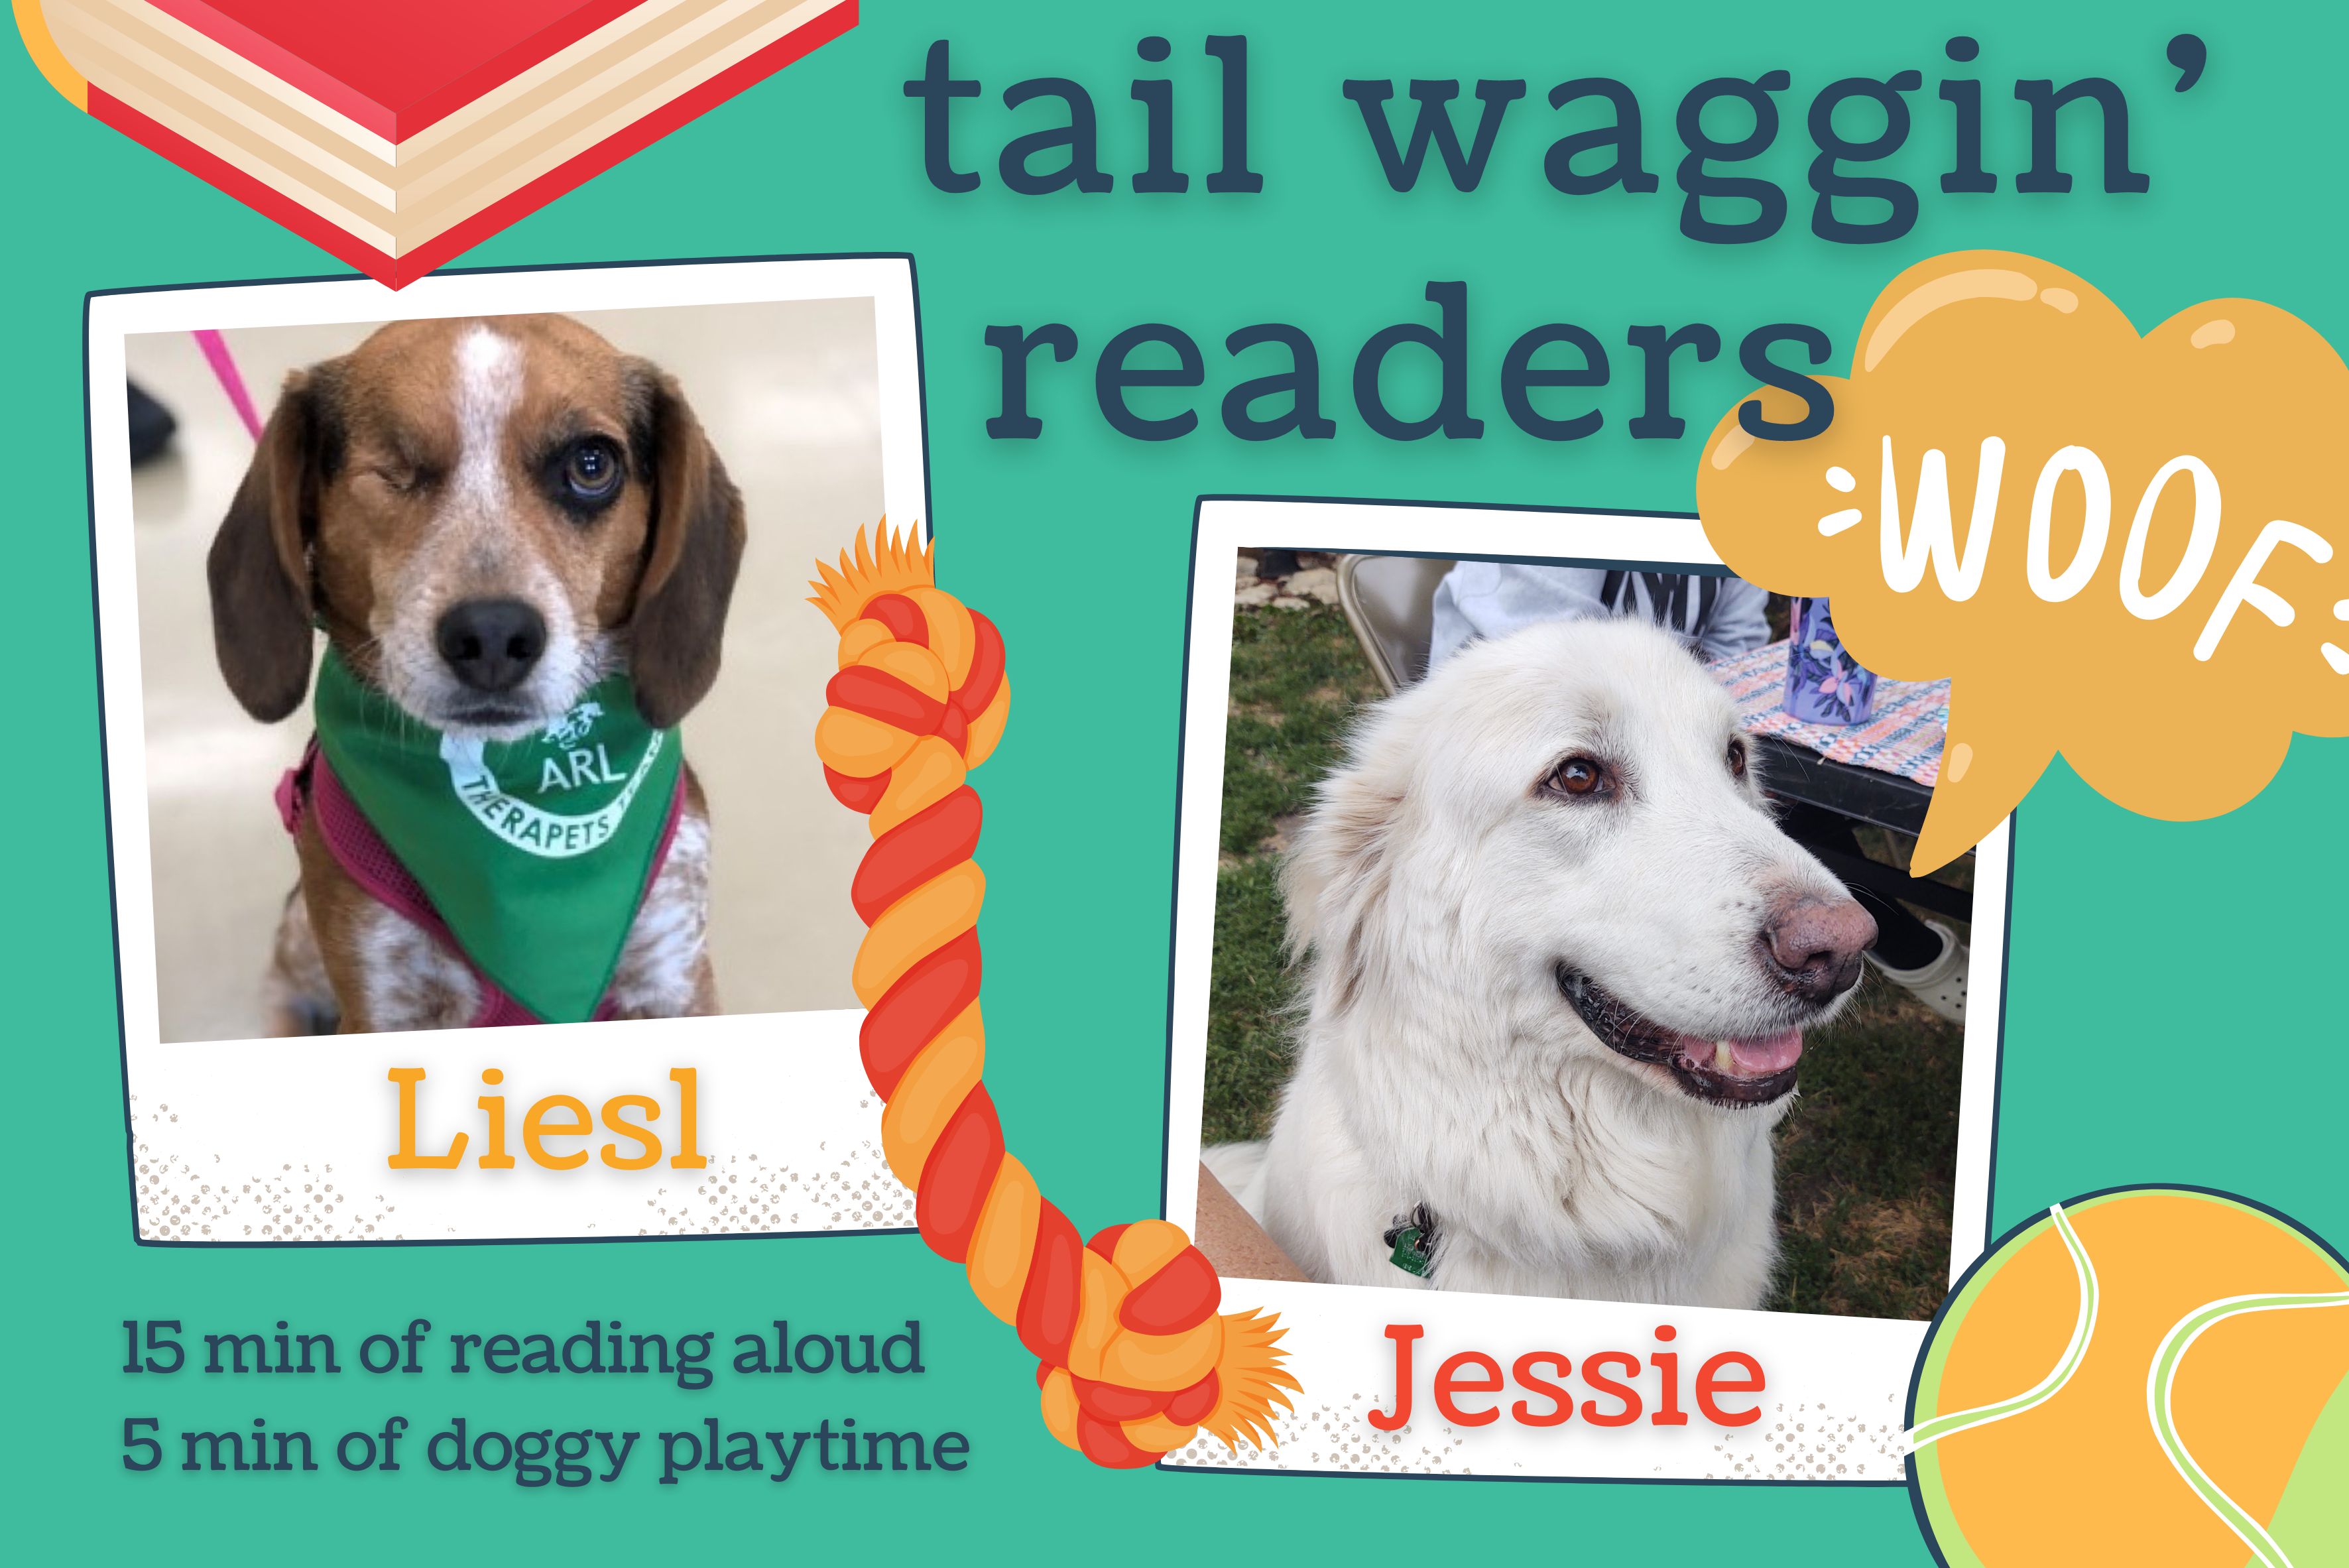 Two therapy dogs with the text "Tail Waggin Readers"